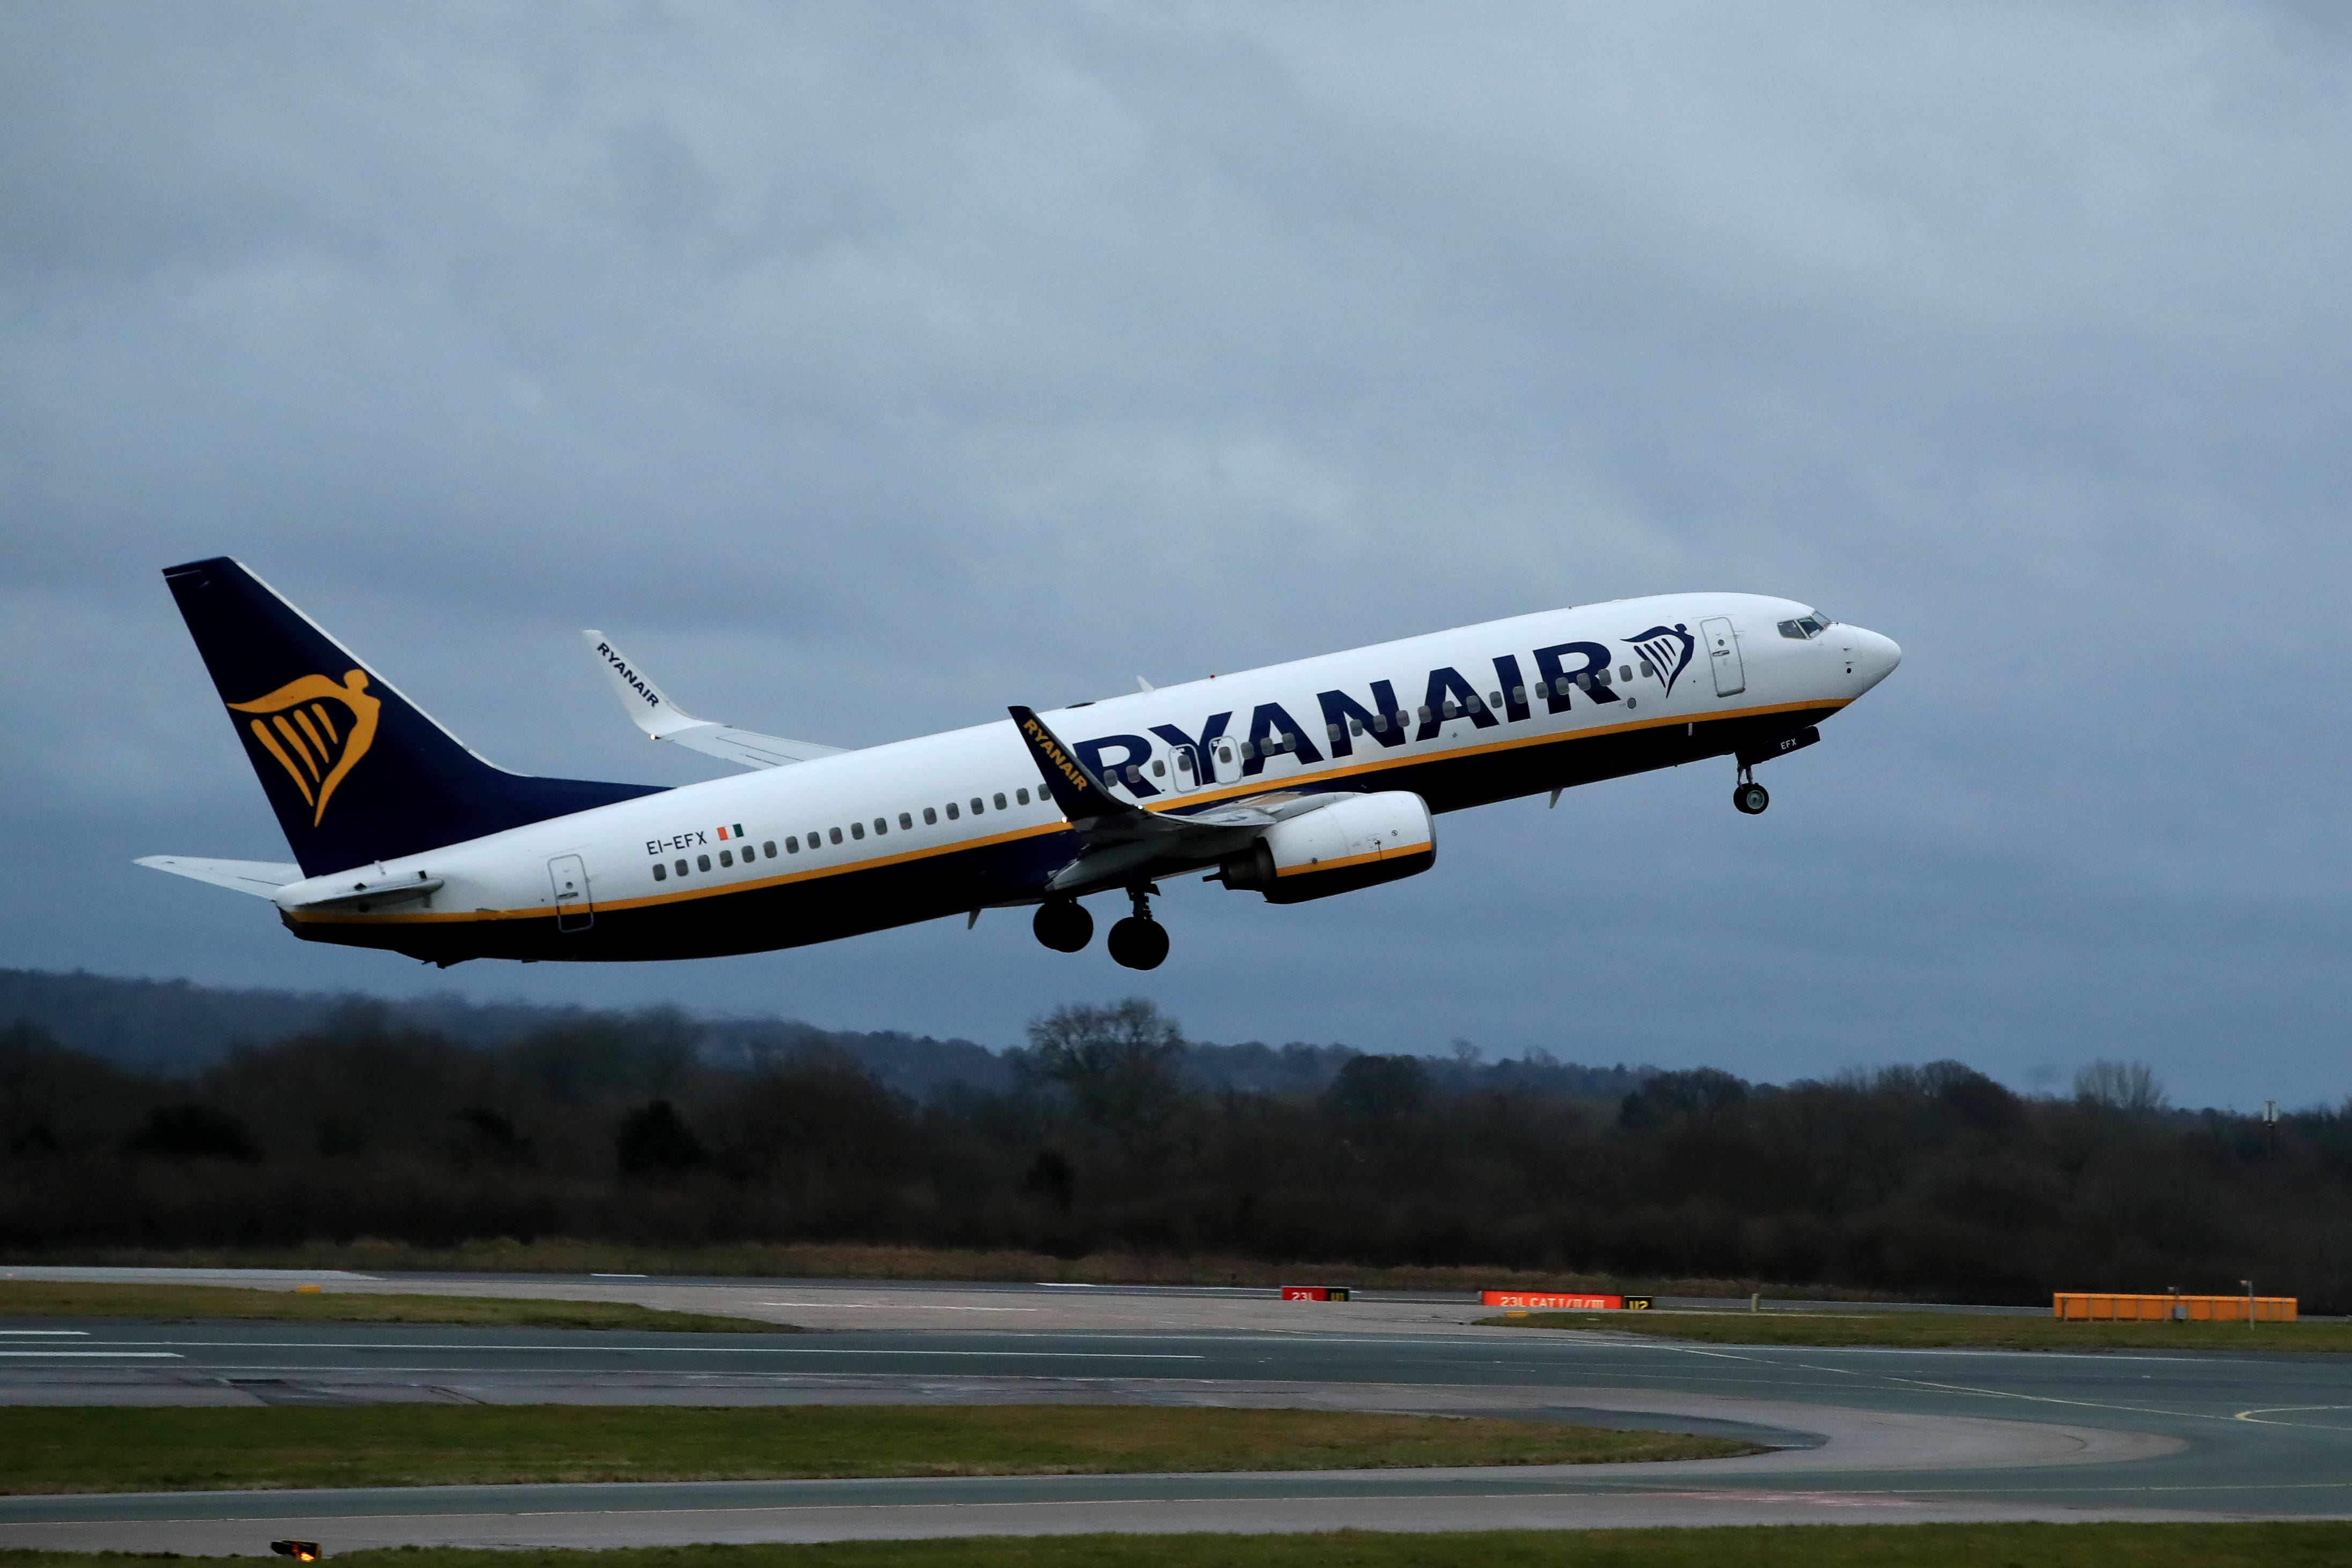 Ryanair said 19.3 million passengers booked tickets for its flights in June